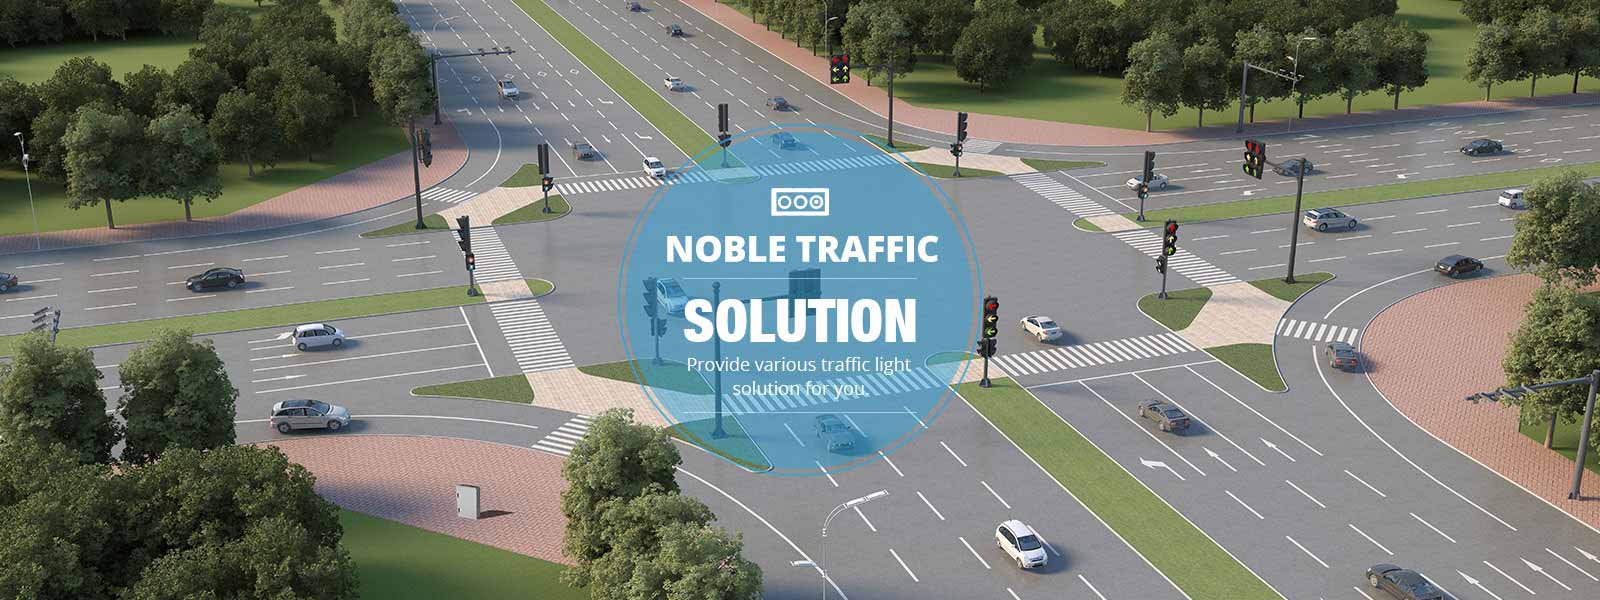 Noble traffic solution